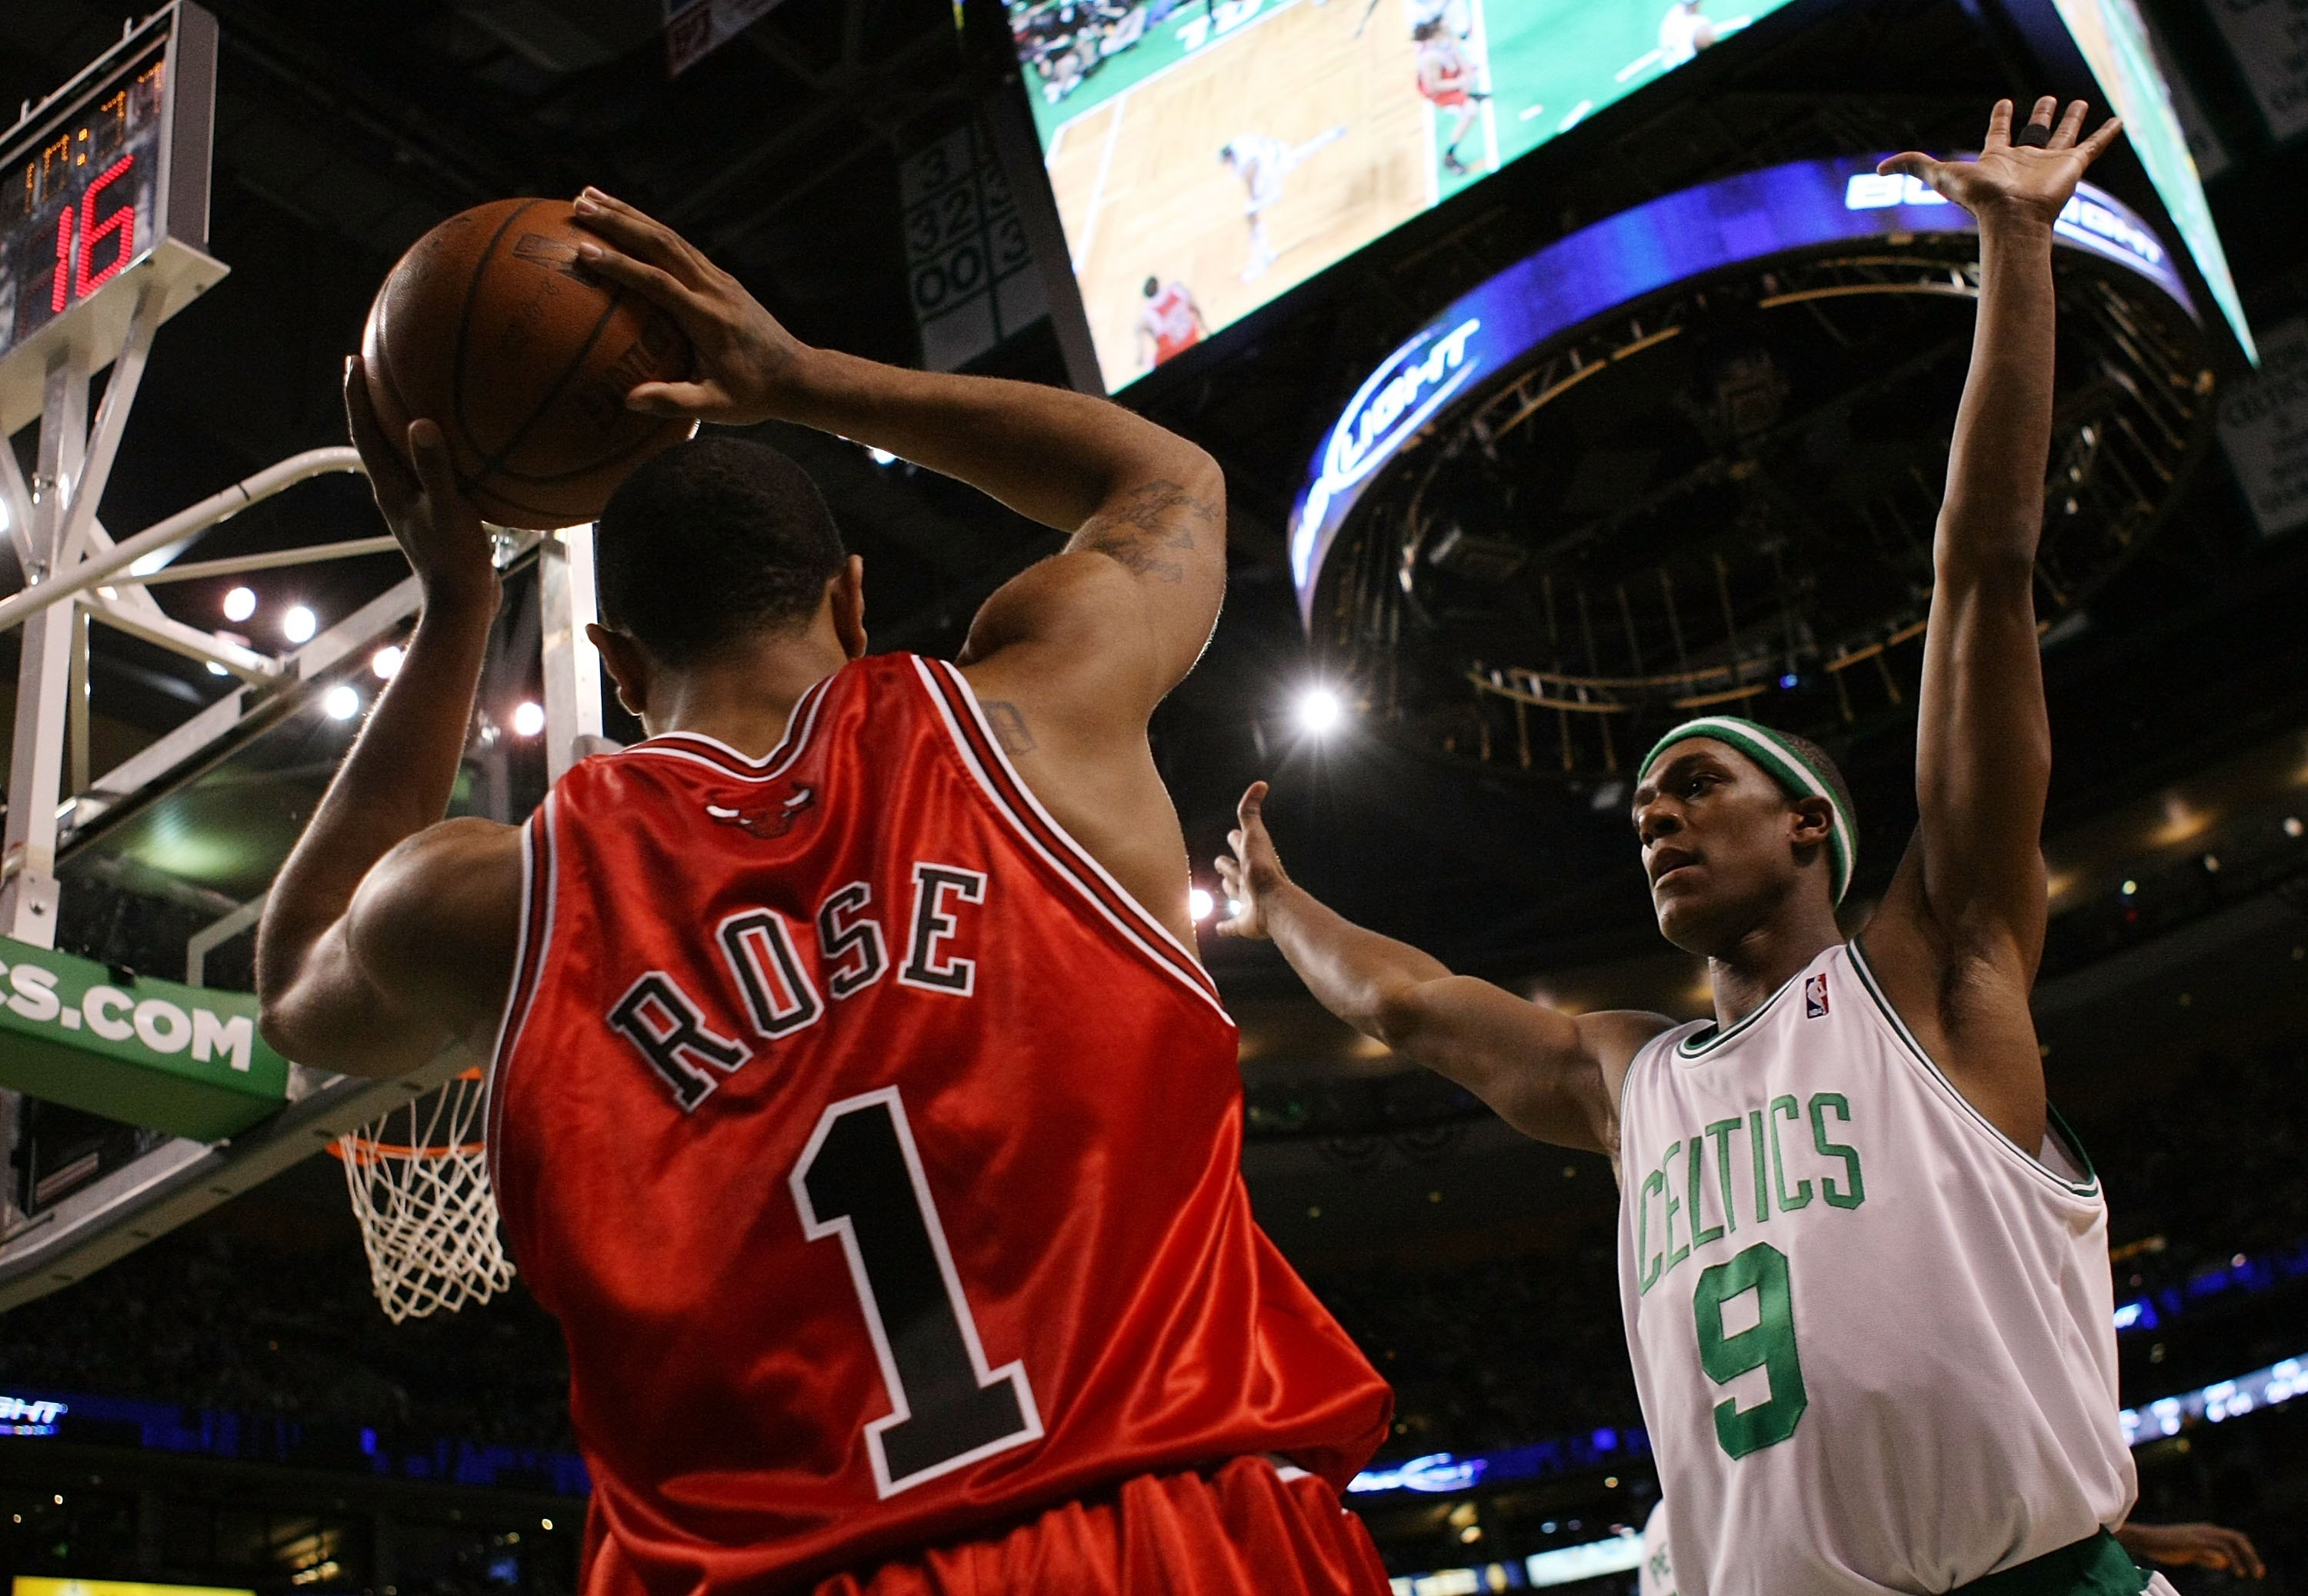 BOSTON - MAY 02:  Rajon Rondo #9 of the Boston Celtics tries to keep Derrick Rose #1 of the Chicago Bulls from passing the ball in bounds in Game Seven of the Eastern Conference Quarterfinals during the 2009 NBA Playoffs at TD Banknorth Garden on May 2, 2